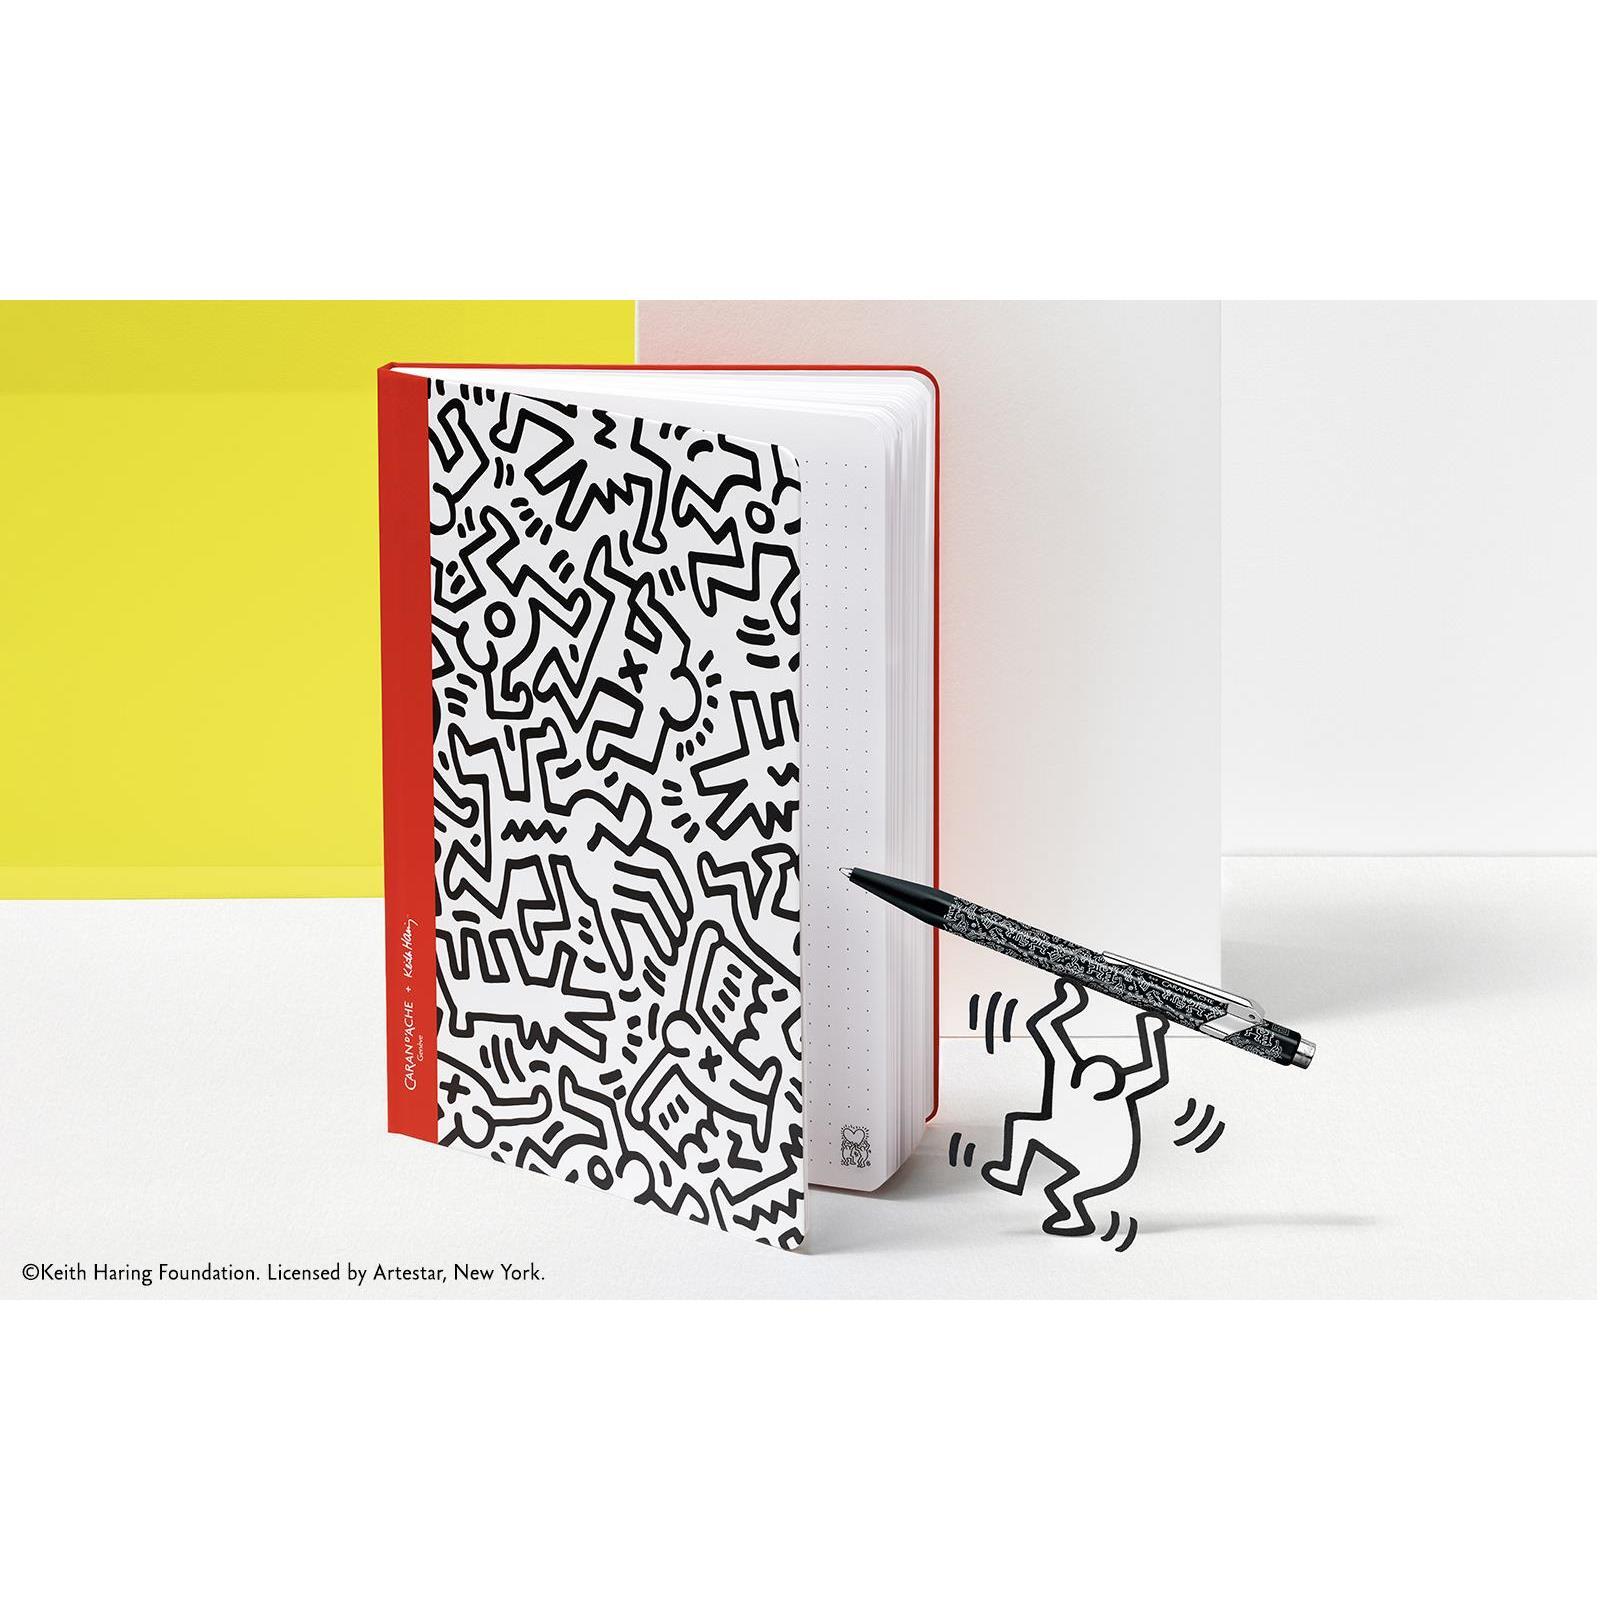 Caran D'Ache 849 Keith Haring Limited Edition Ballpoint Pen Black